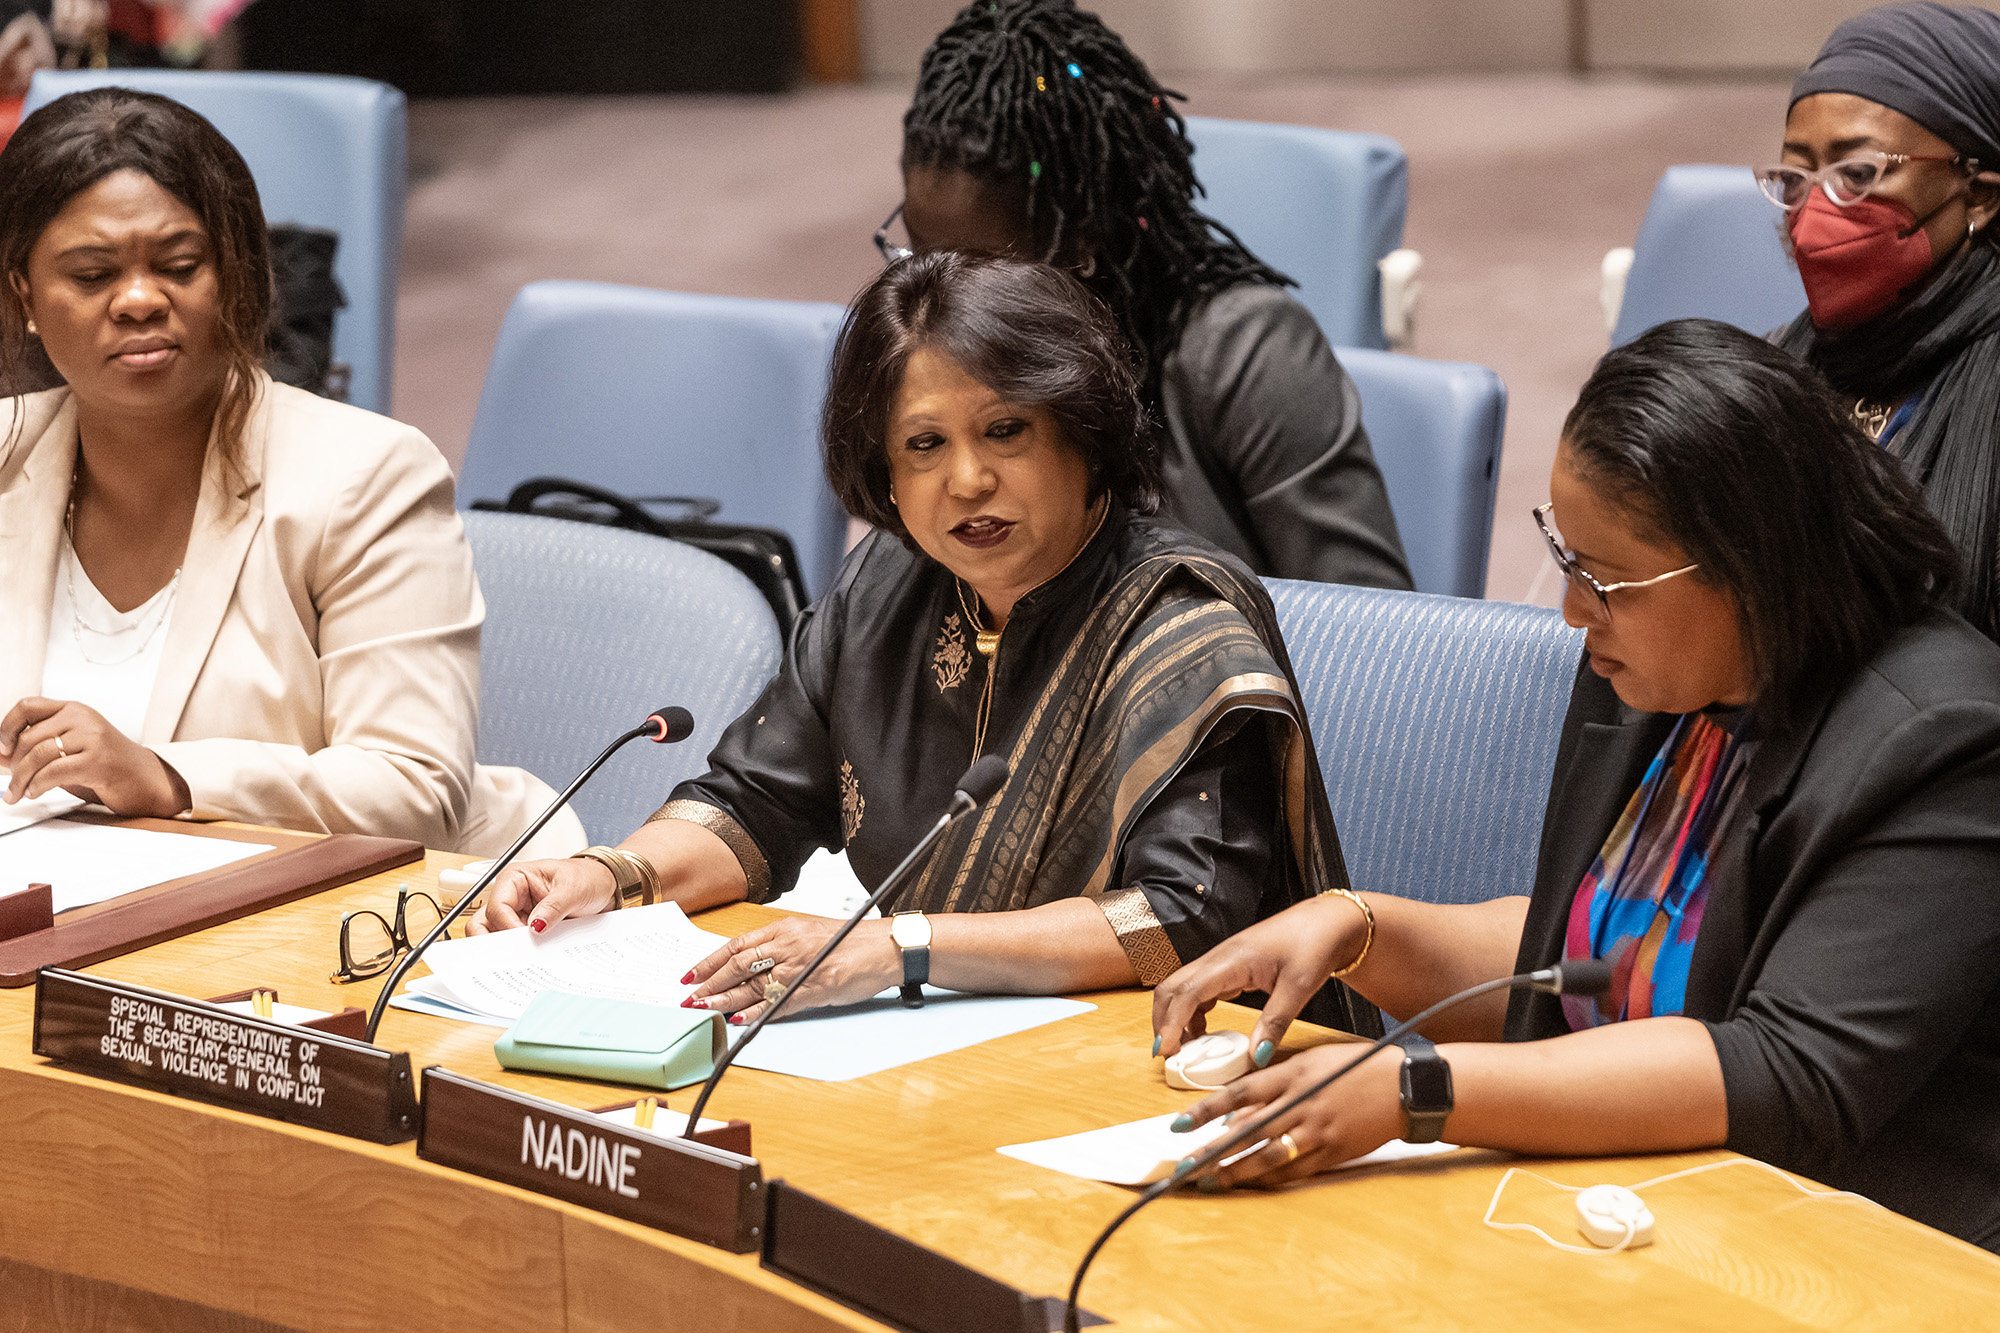 Pramila Patten, Special Representative of the Secretary-General on Sexual Violence in Conflict speaks during Security Council meeting on Women and peace and security at UN Headquarters in New York on July 14.